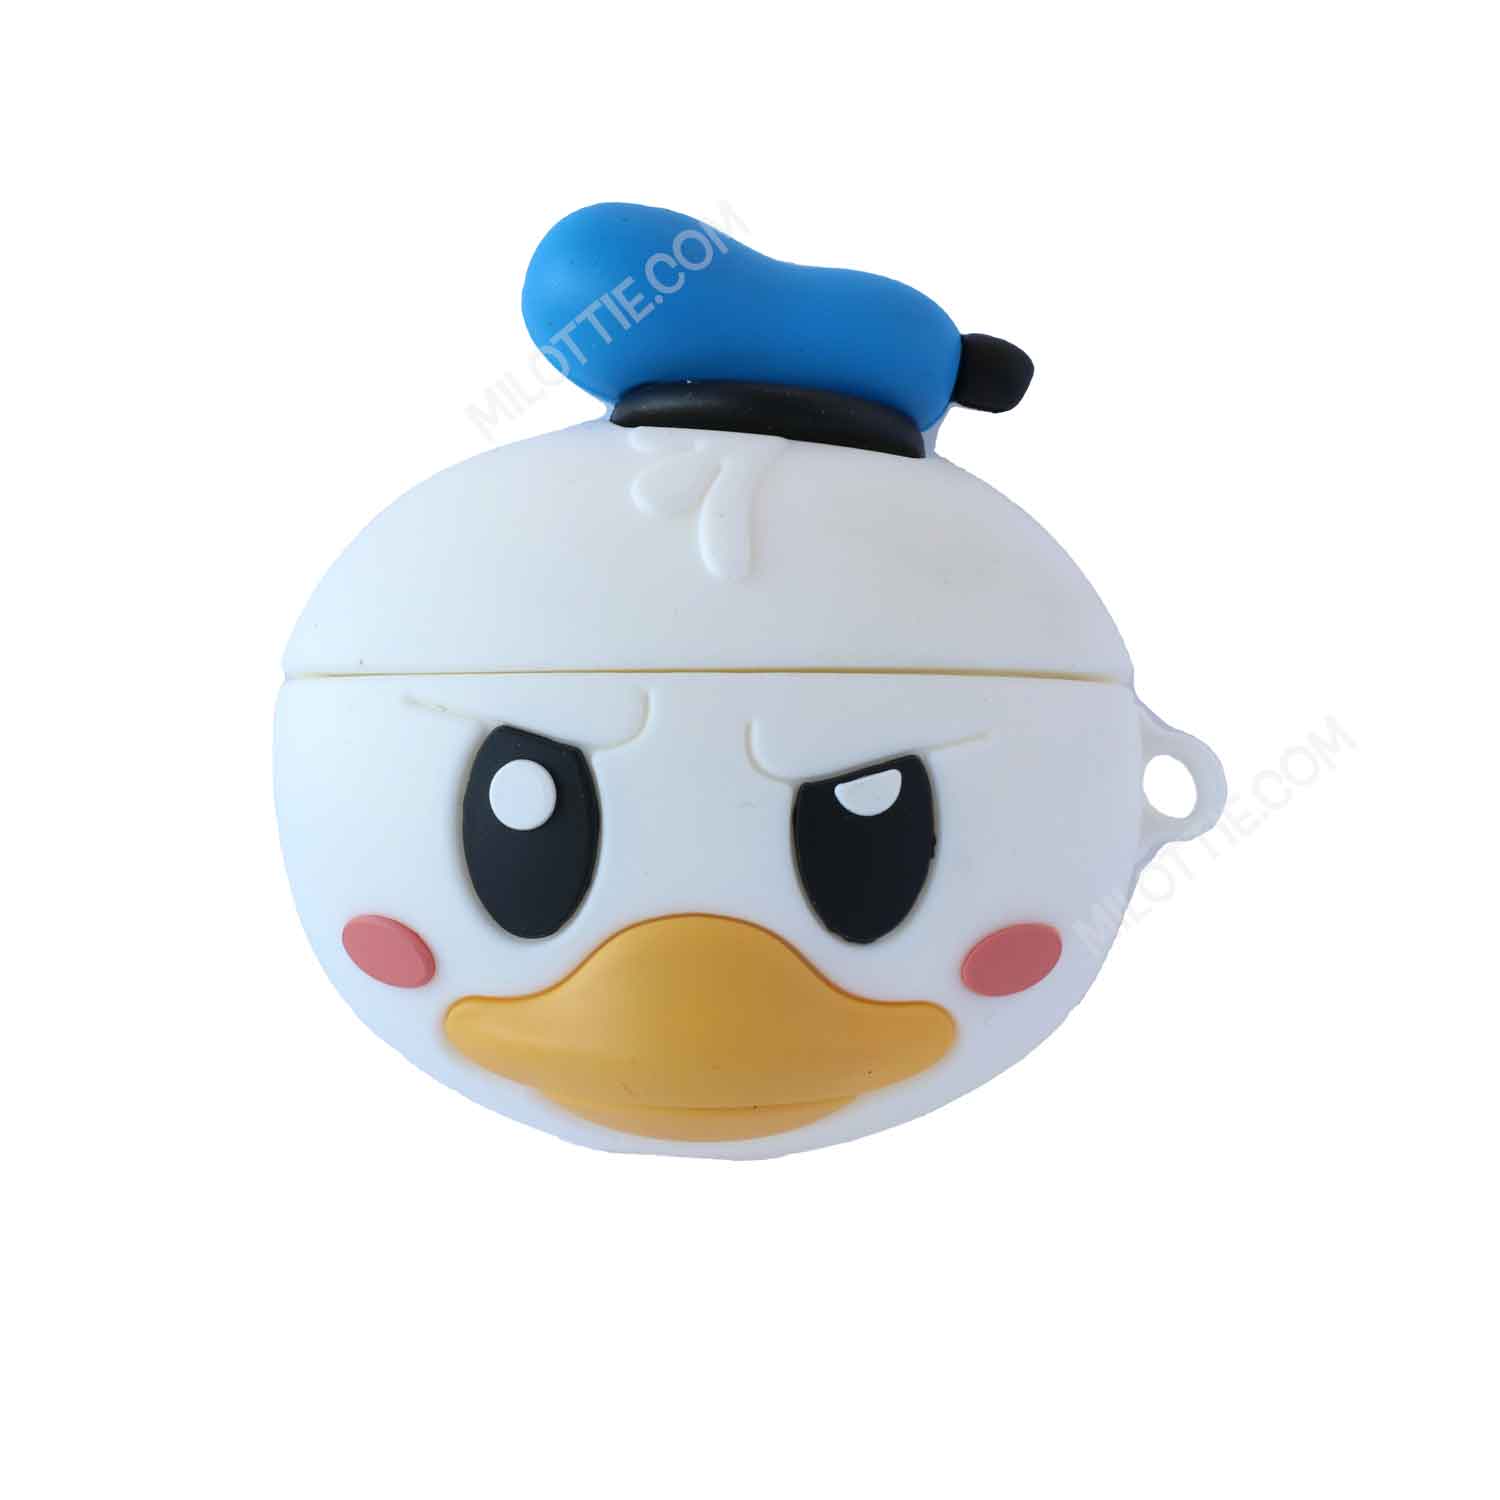 Donald Duck Apple AirPods Pro Case